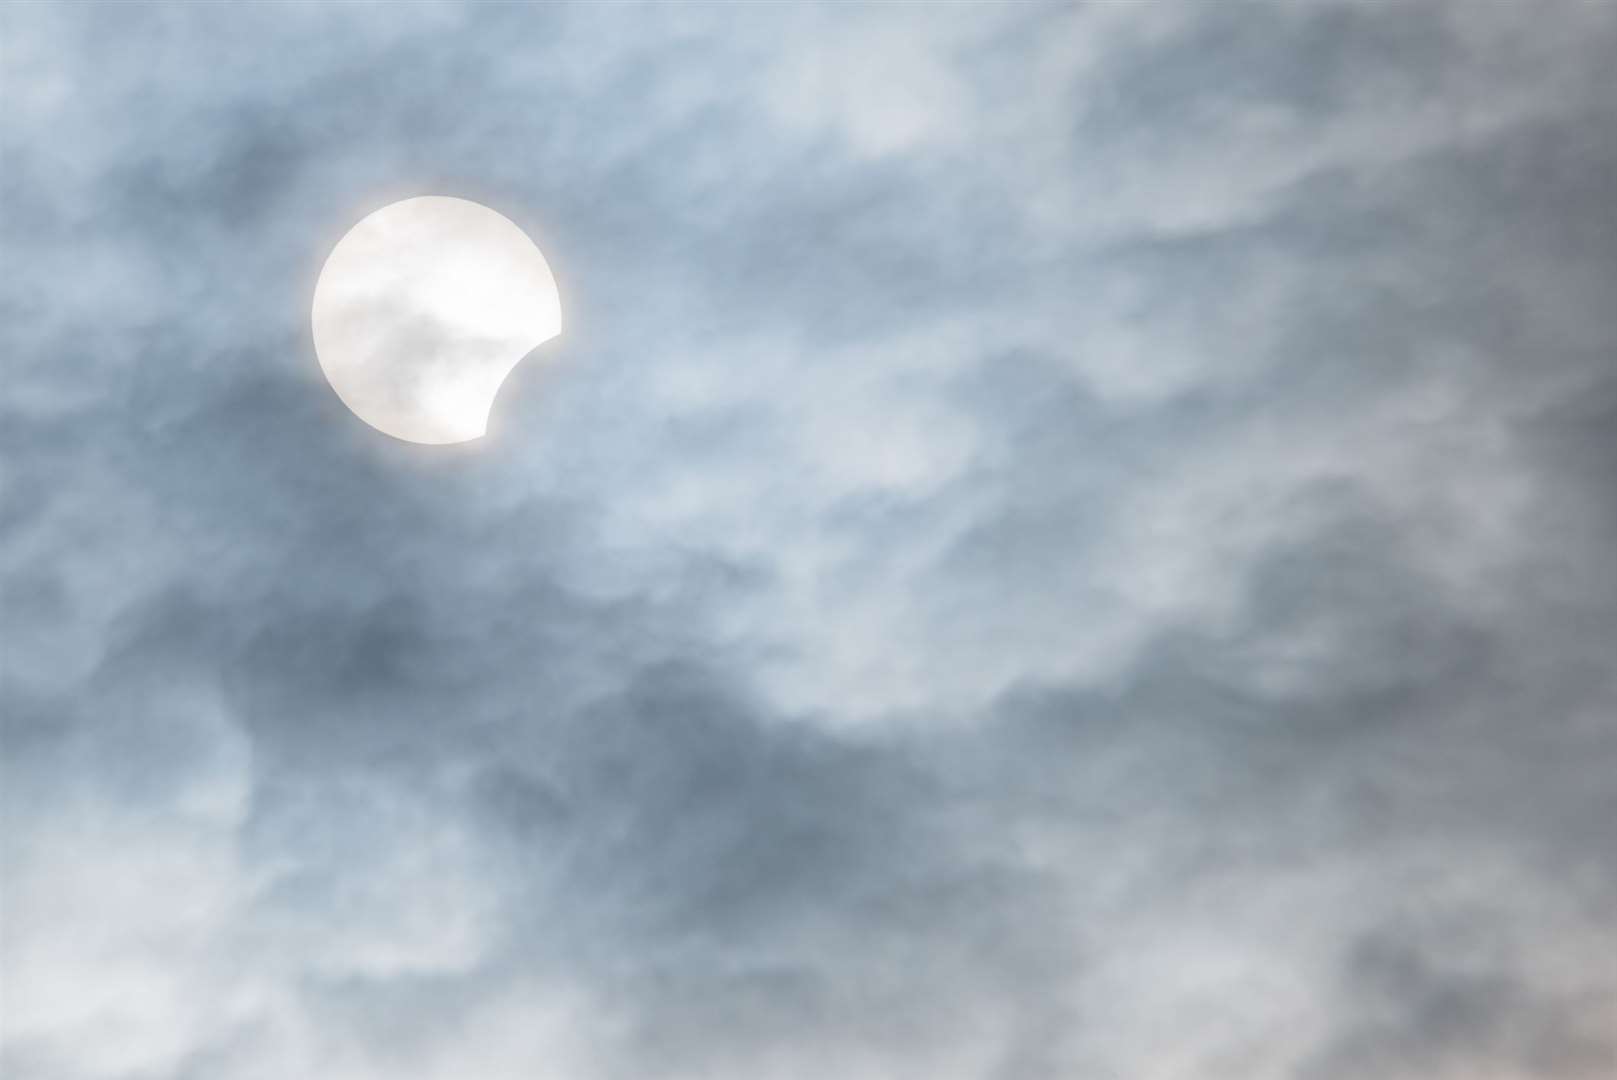 The partial eclipse will be the only one visible for the UK this year